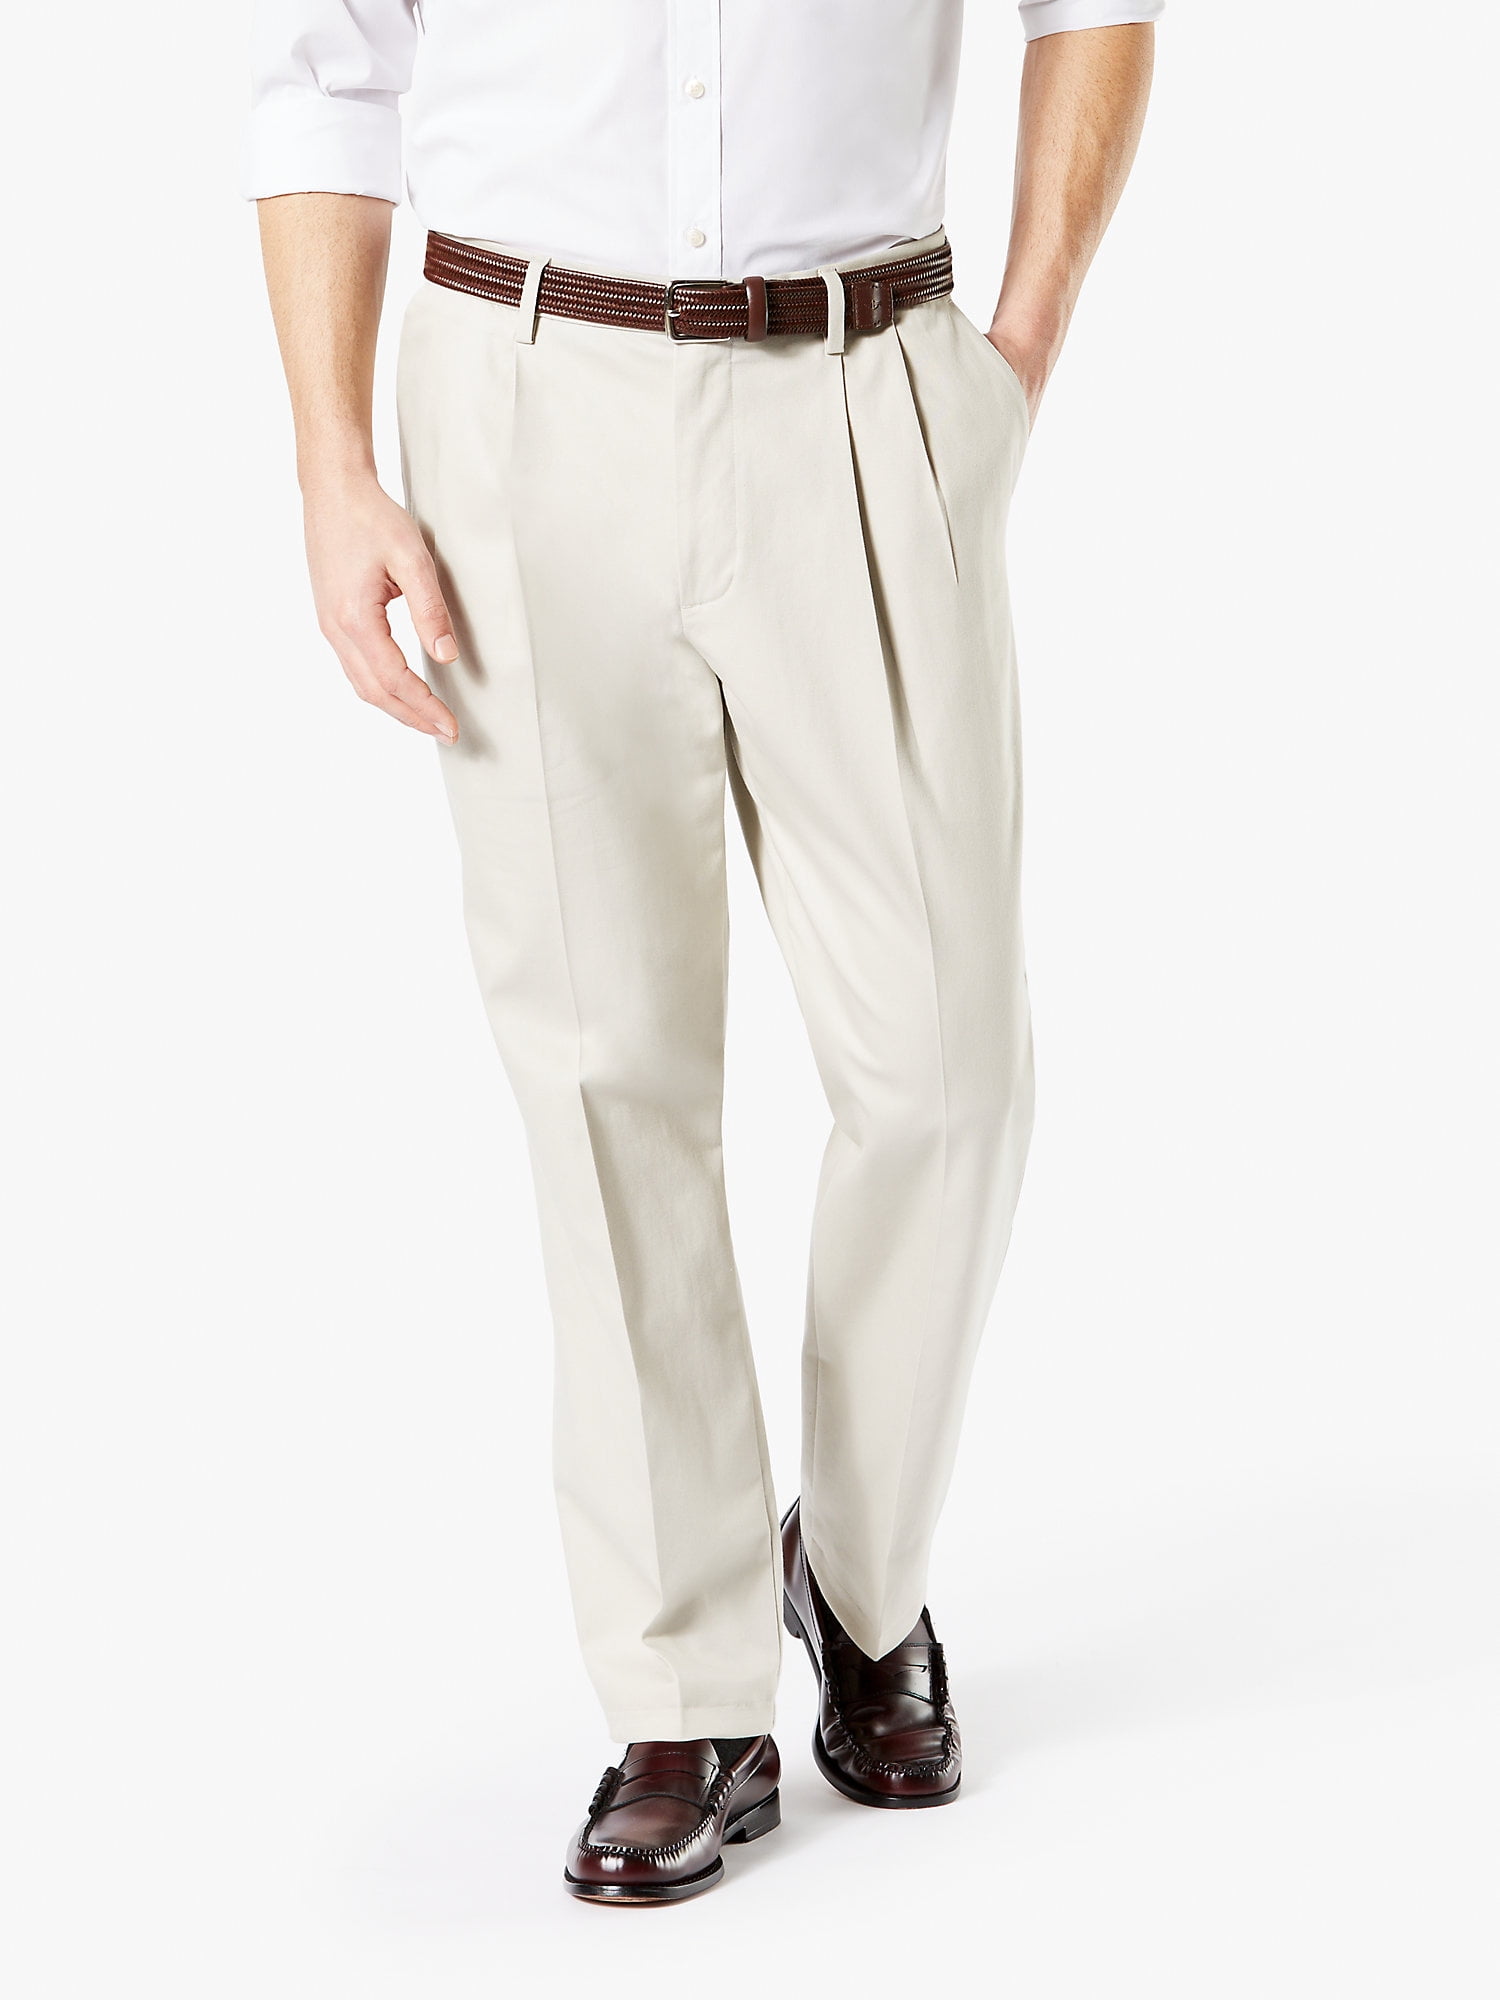 Dockers Mens Insignia Wrinkle Free Khaki Straight-Fit Flat-Front Pant 